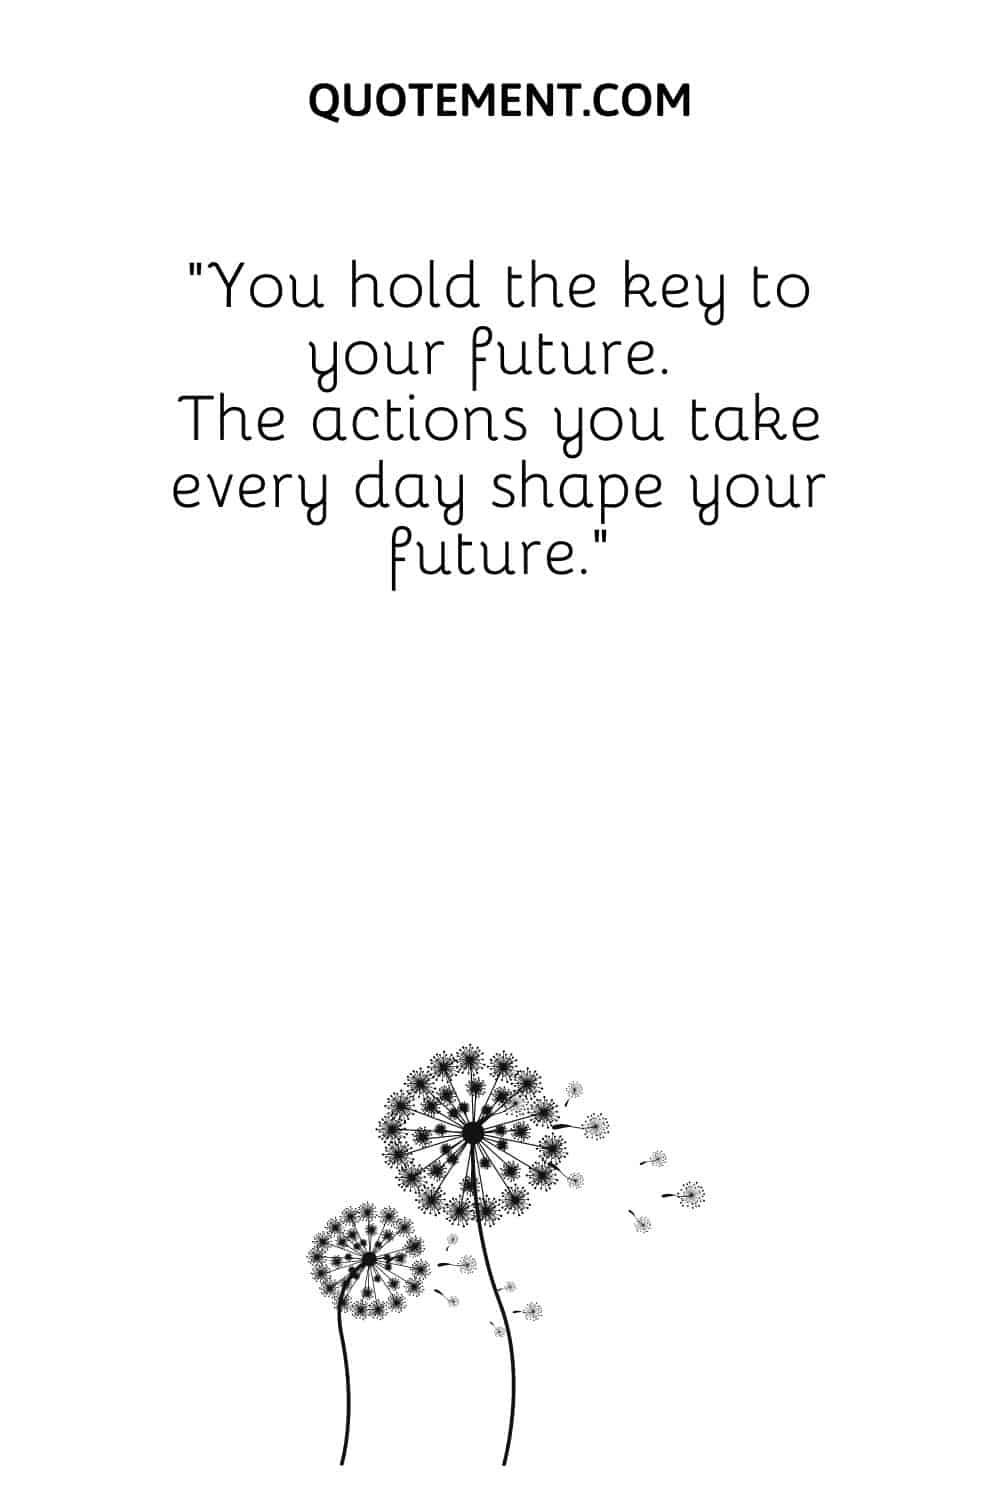 You hold the key to your future